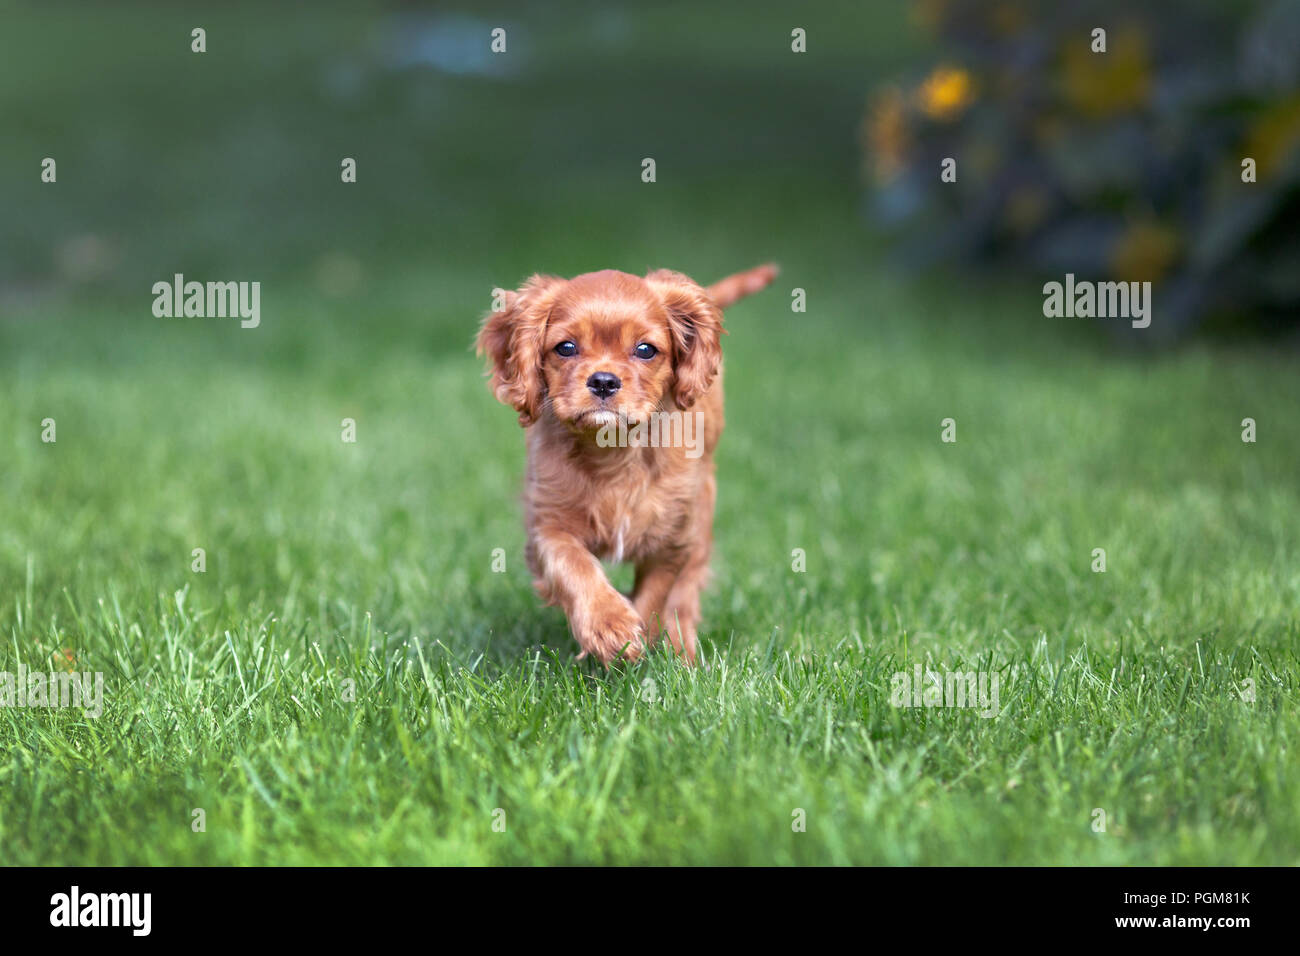 Adorable puppy walking on the green grass Stock Photo